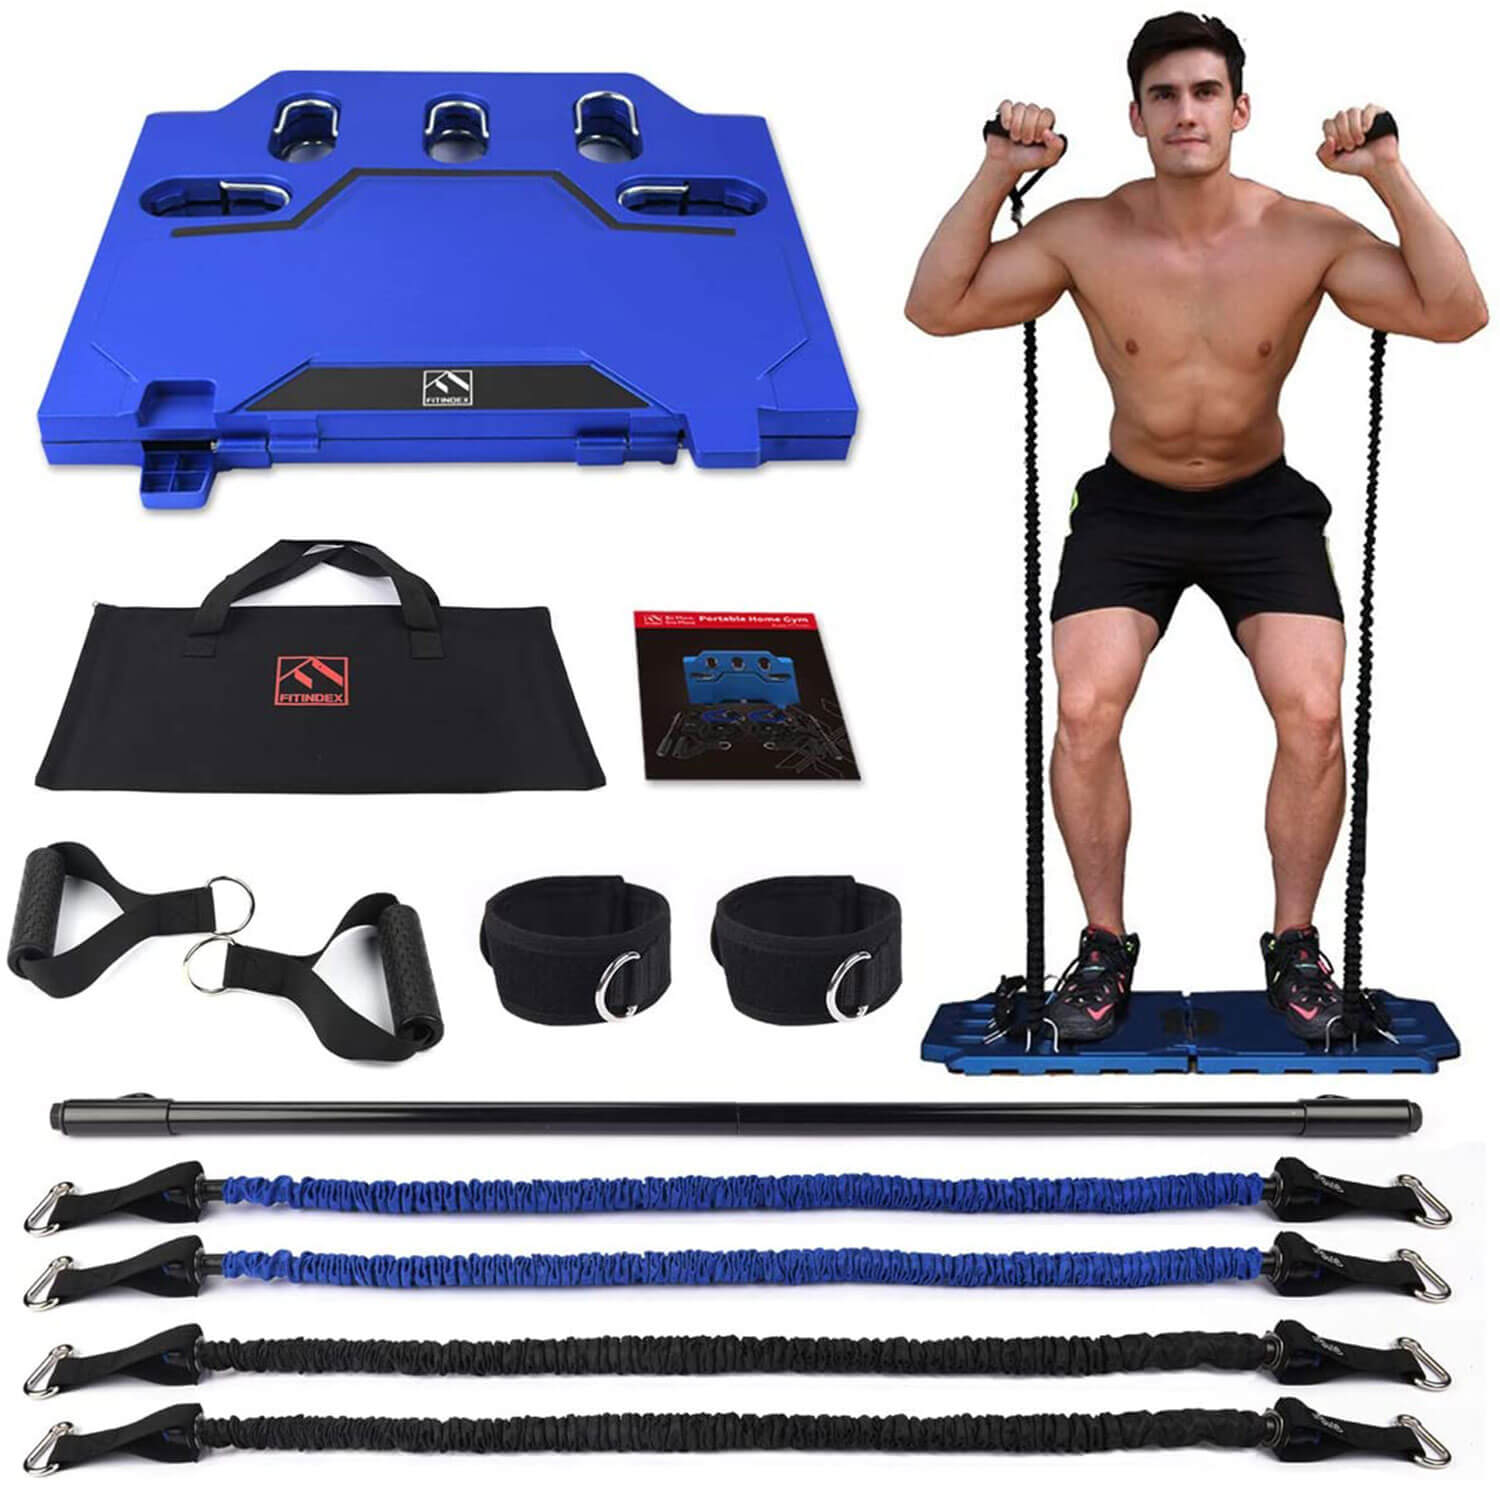 Fitness Accessories - Weightlifting & Exercise Belts